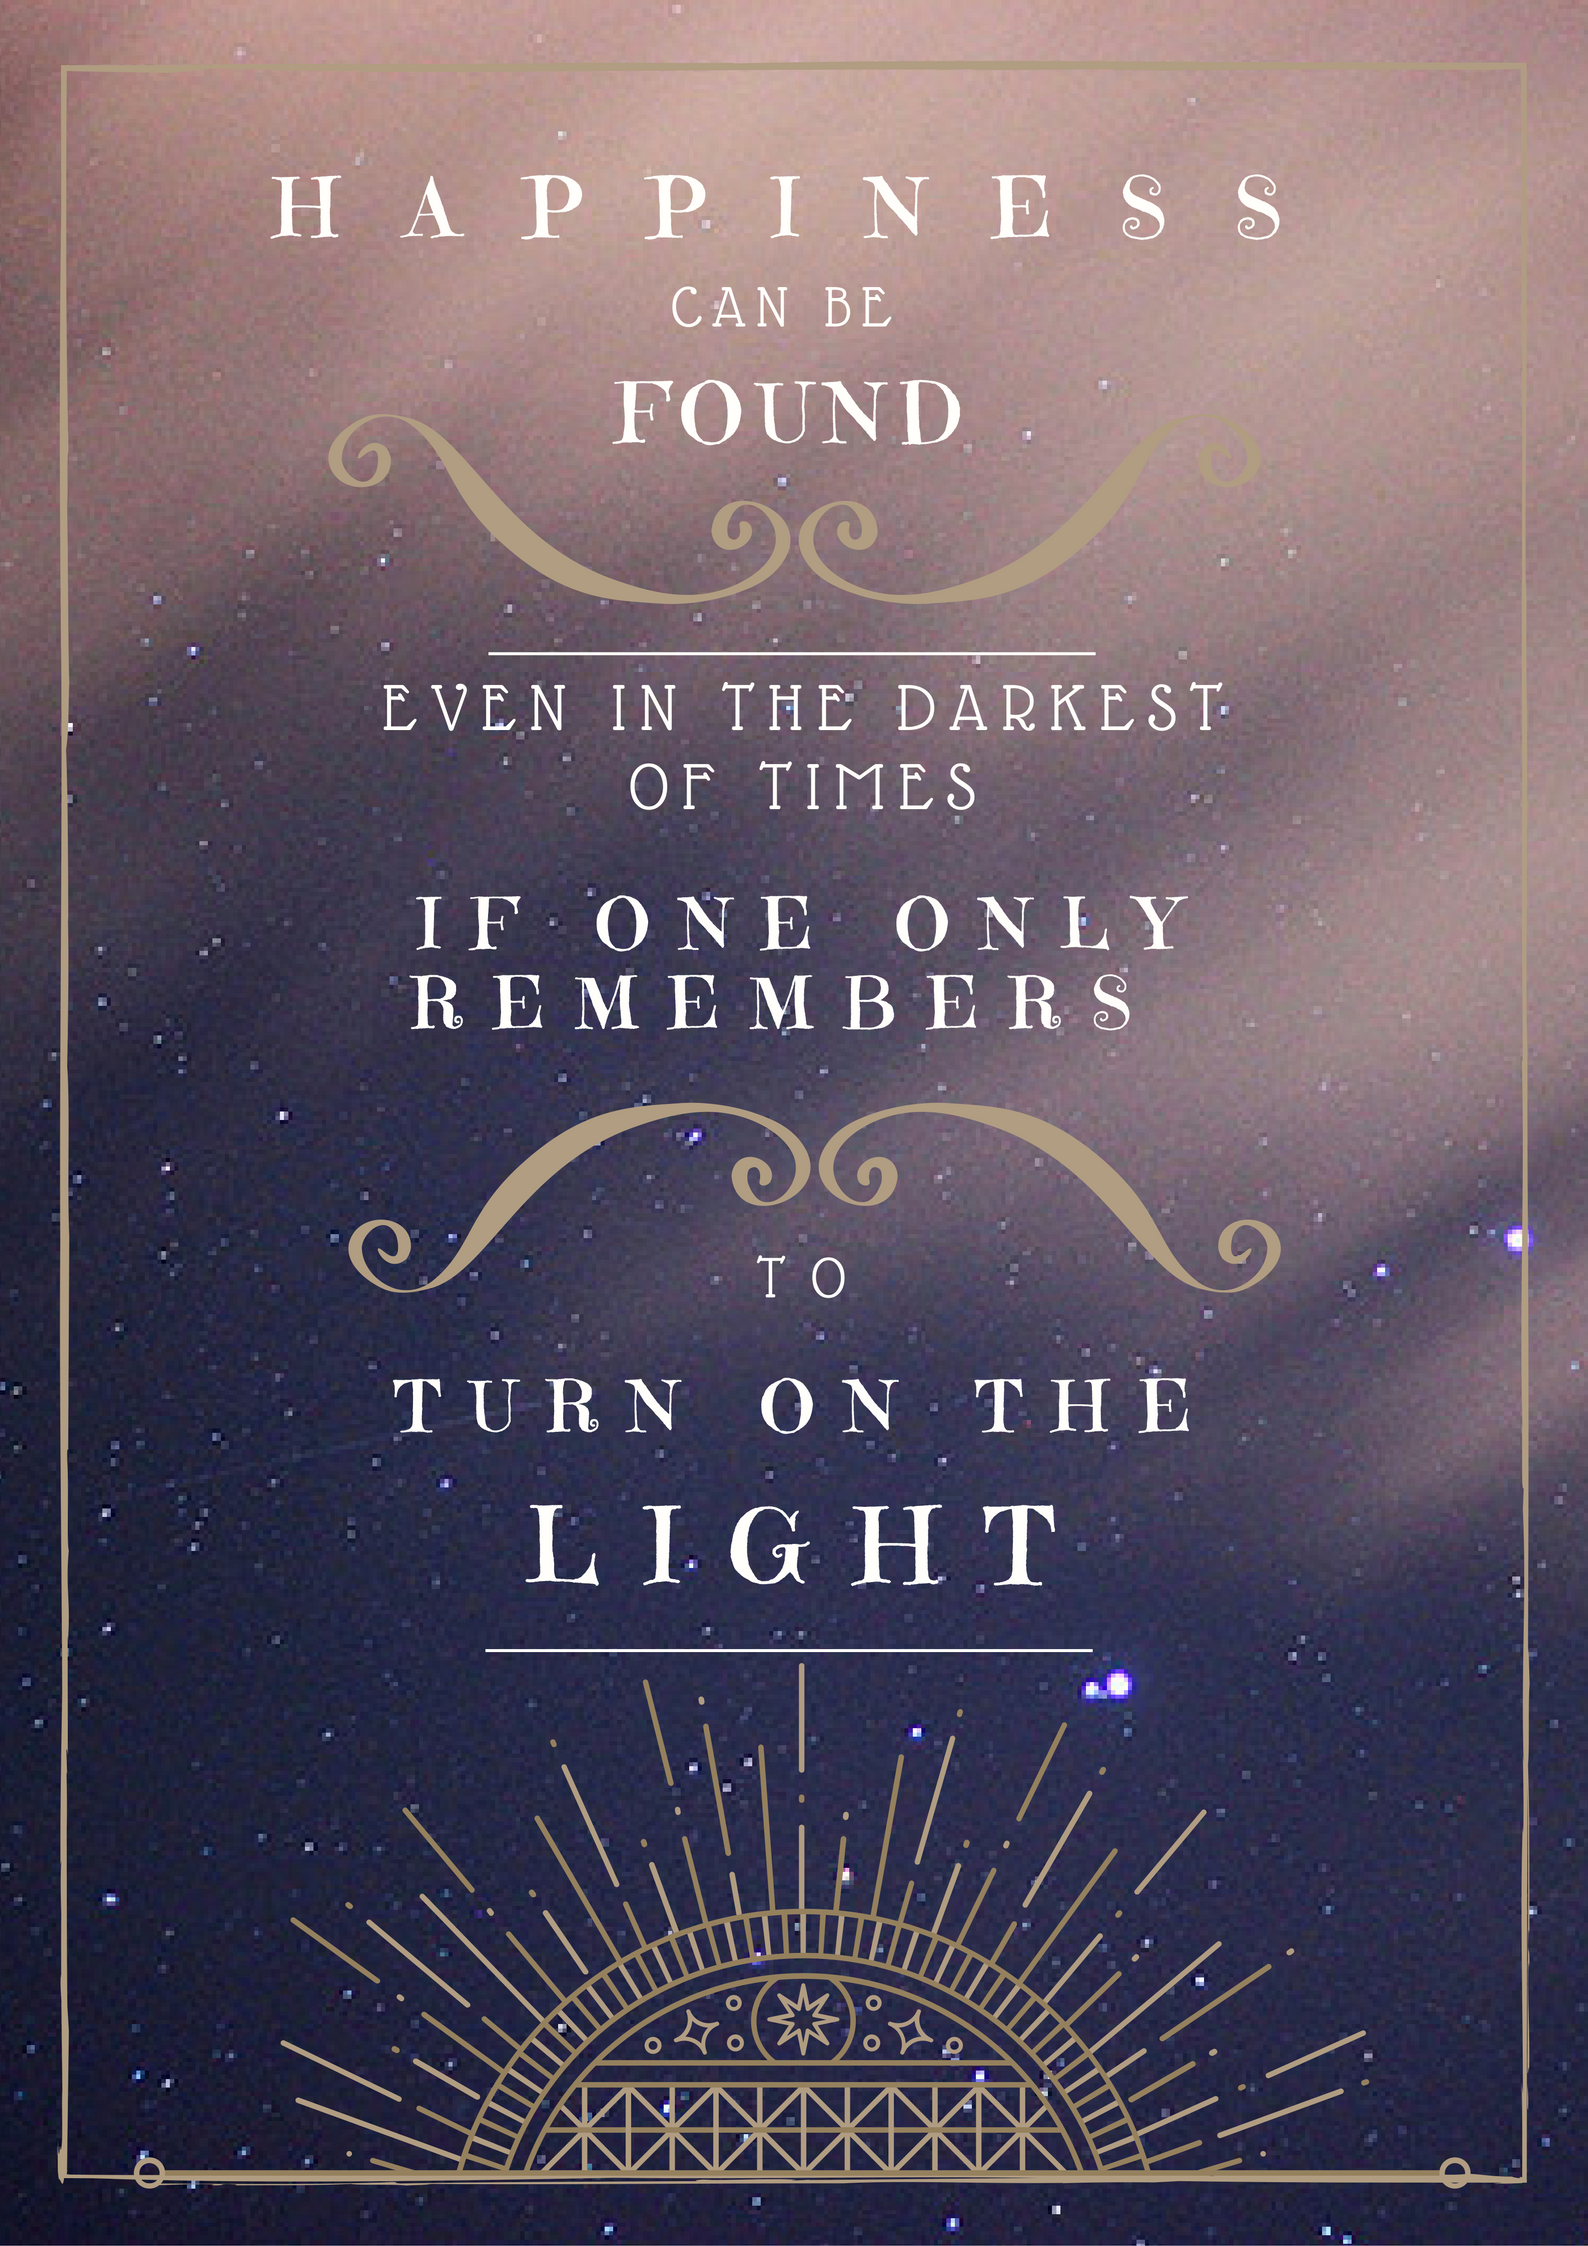 Happiness can be found even in the darkest of times, if one only remembers to t. Harry potter quotes wallpaper, Harry potter iphone, Harry potter iphone wallpaper